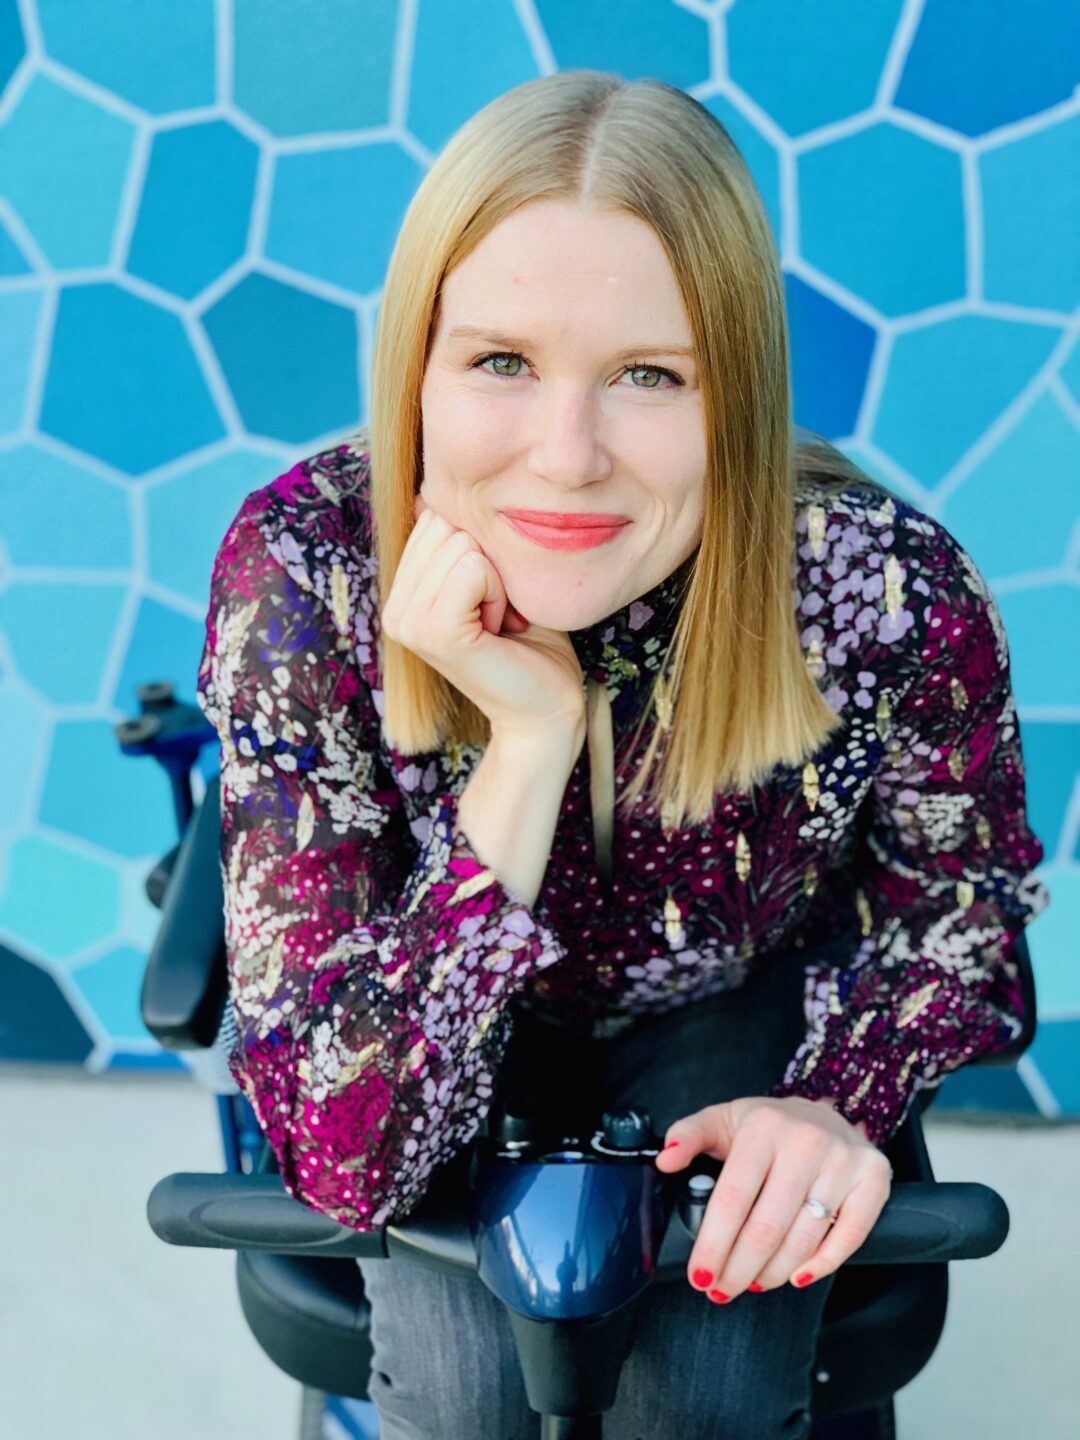 a white woman with blonde hair wearing a purple blouse and sitting in her mobility scooter in front of a wall with blue geometric shapes